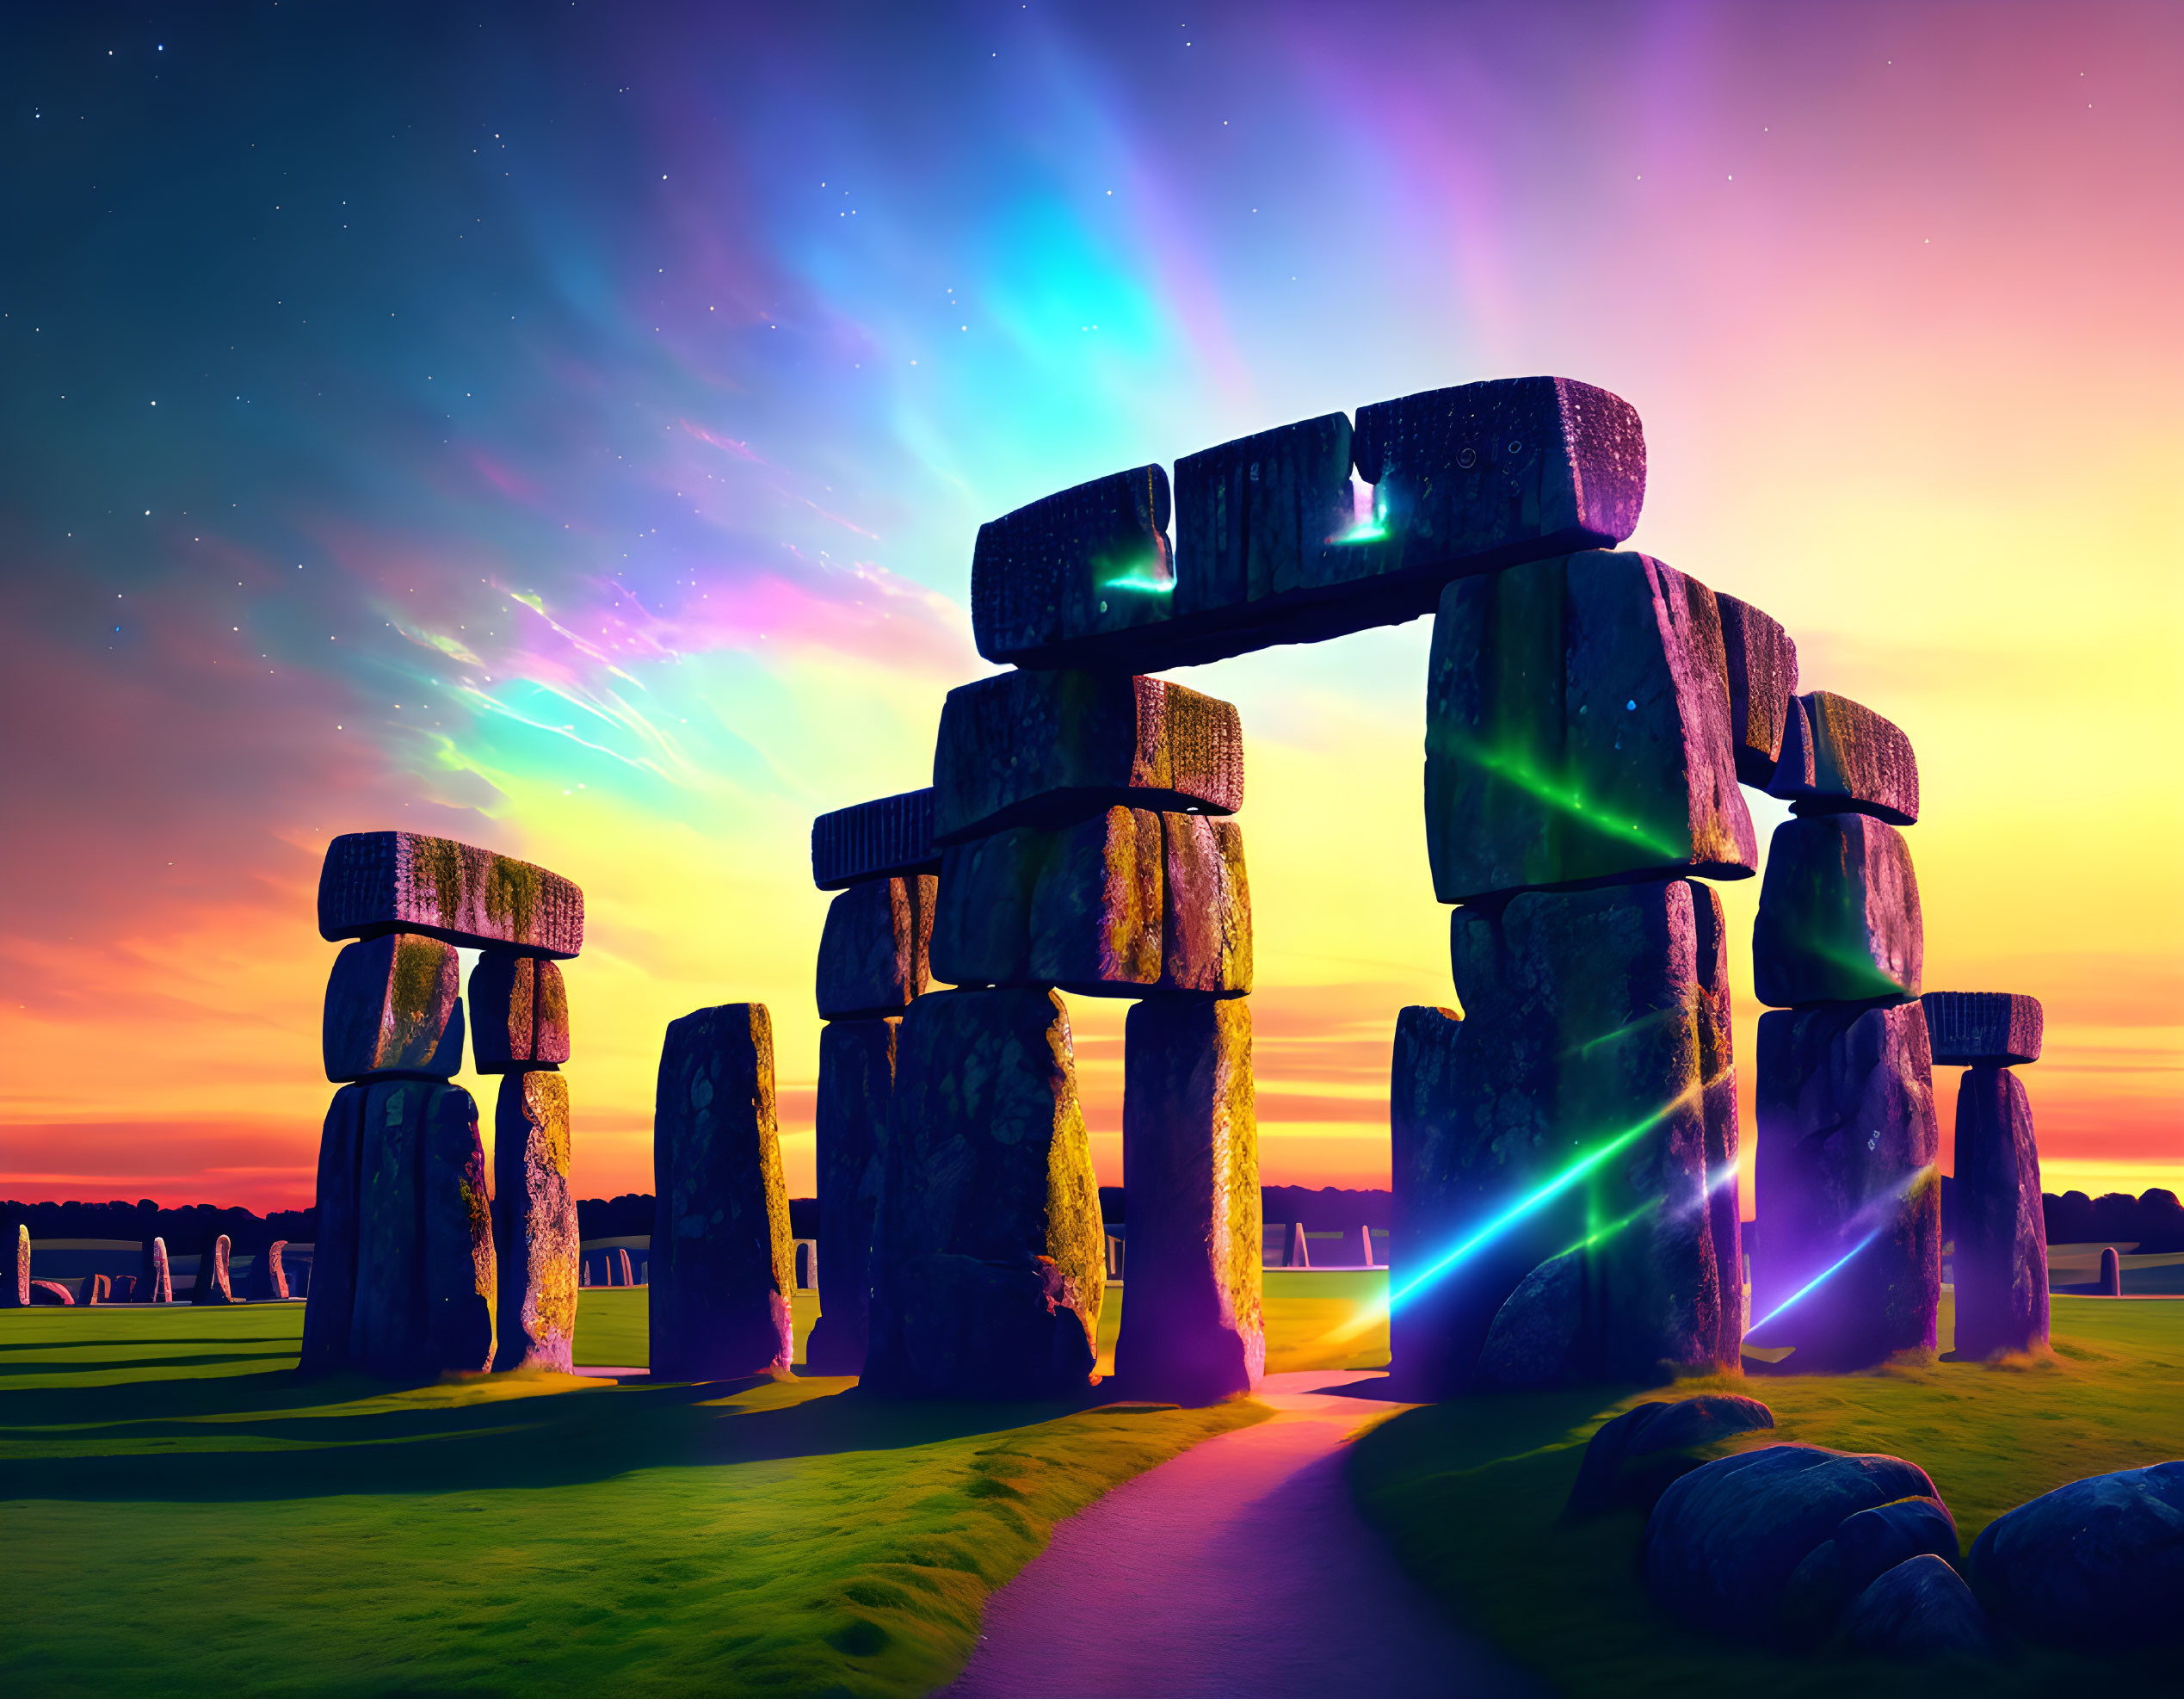 Ancient Stonehenge lit up by colorful lights at twilight